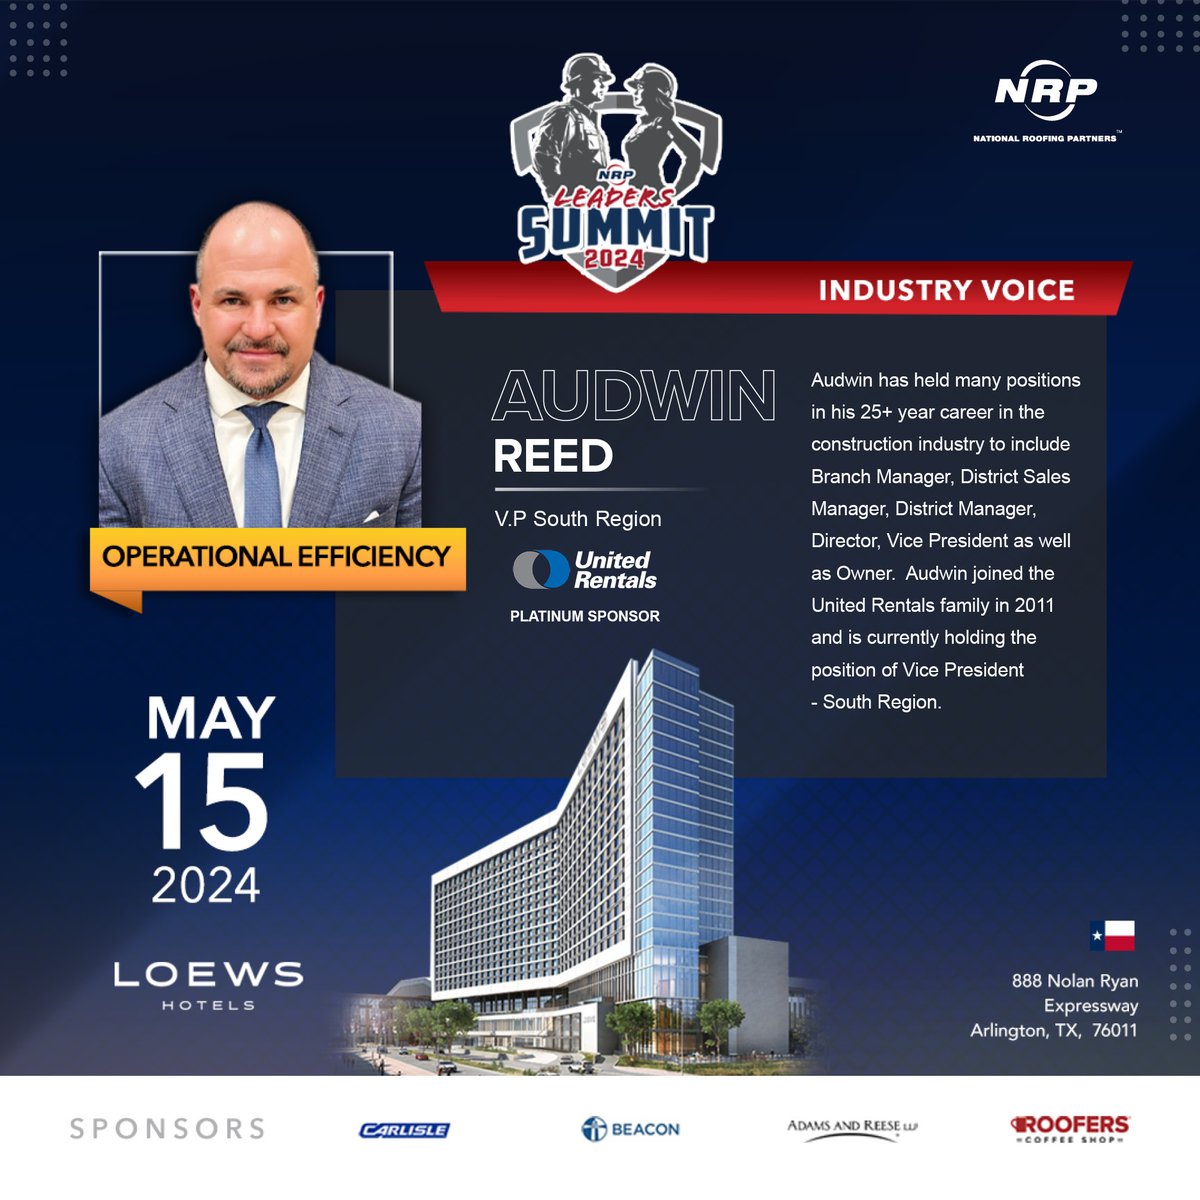 #LeadersSummit2024 Platinum Sponsor Speaker! Audwin Reed- United Rentals current VP - South Region. With over 25 years in the construction industry, Audwin will share insights on Strengthening Partnerships Through Operational Efficiency!

Secure your spot: lnkd.in/gdQjdYYf